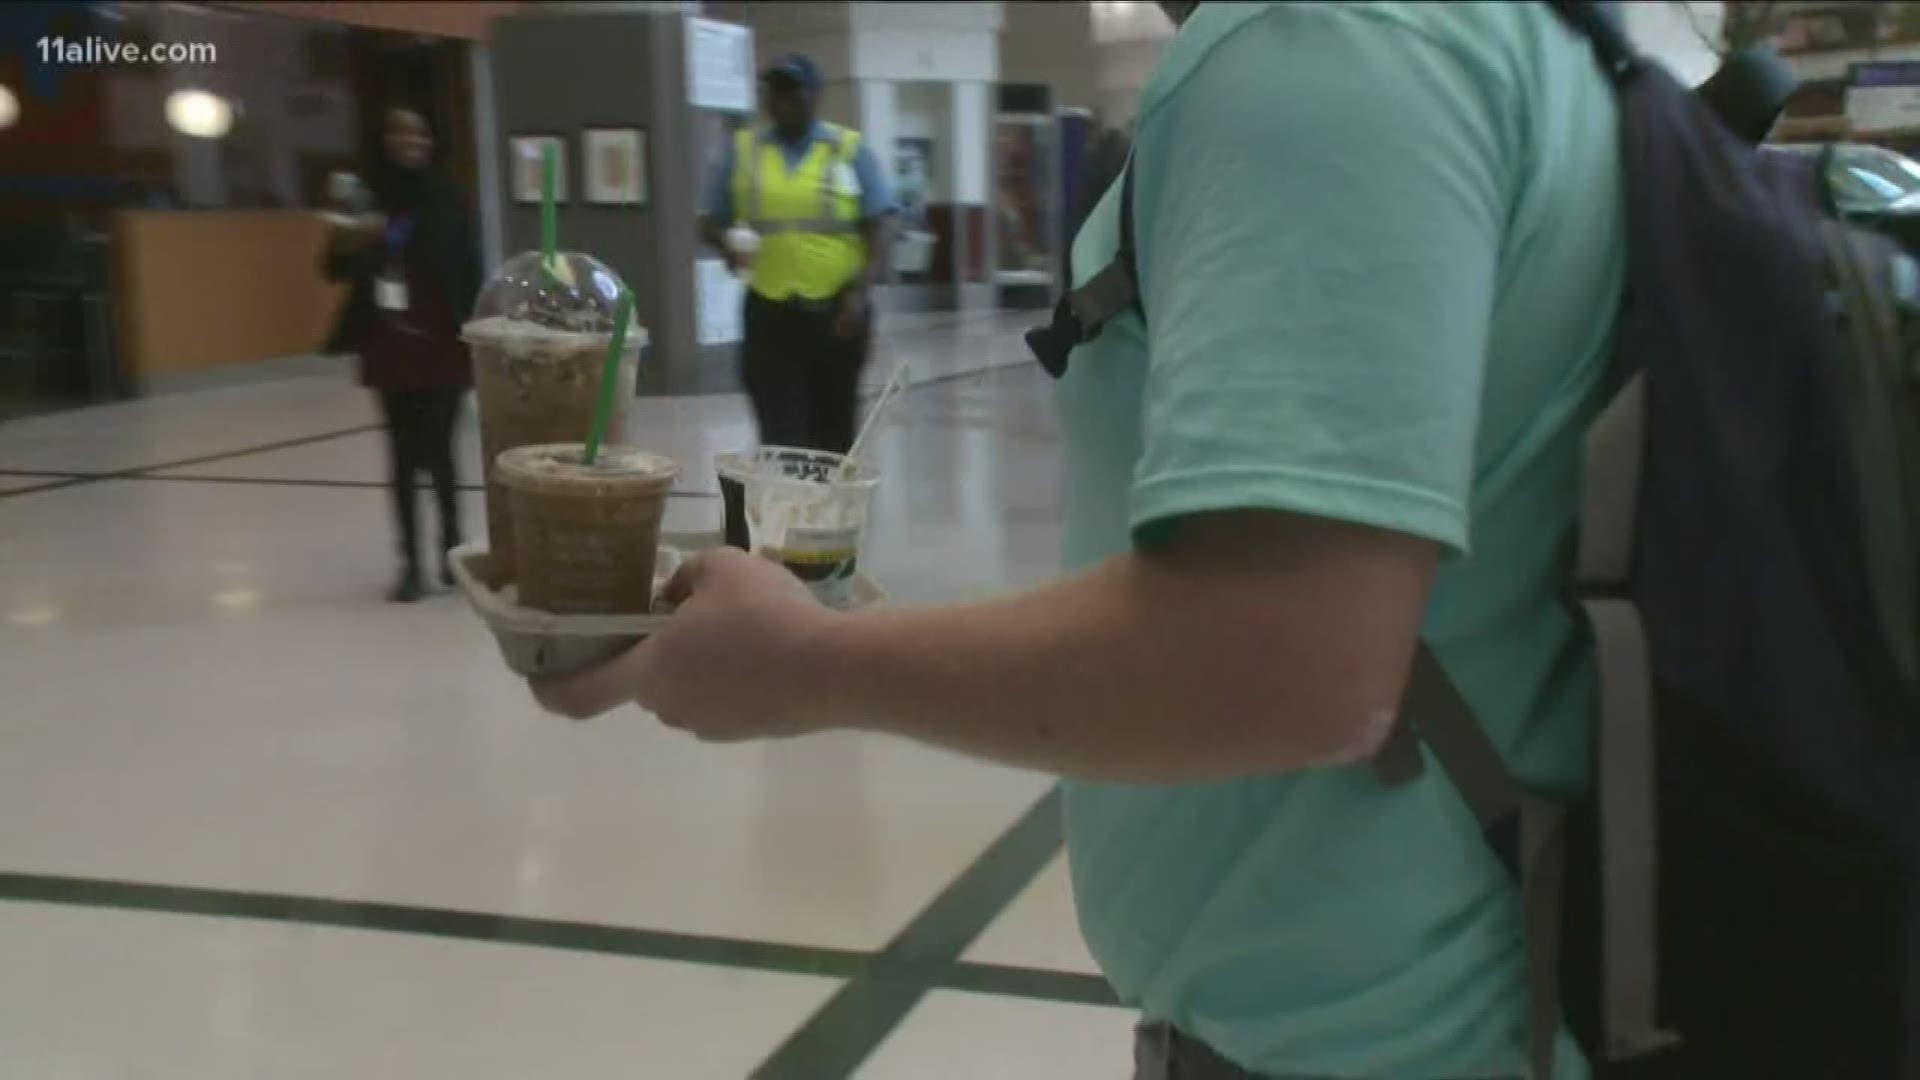 Atlanta is considering banning non-recyclable plastic from government facilities like the airport.